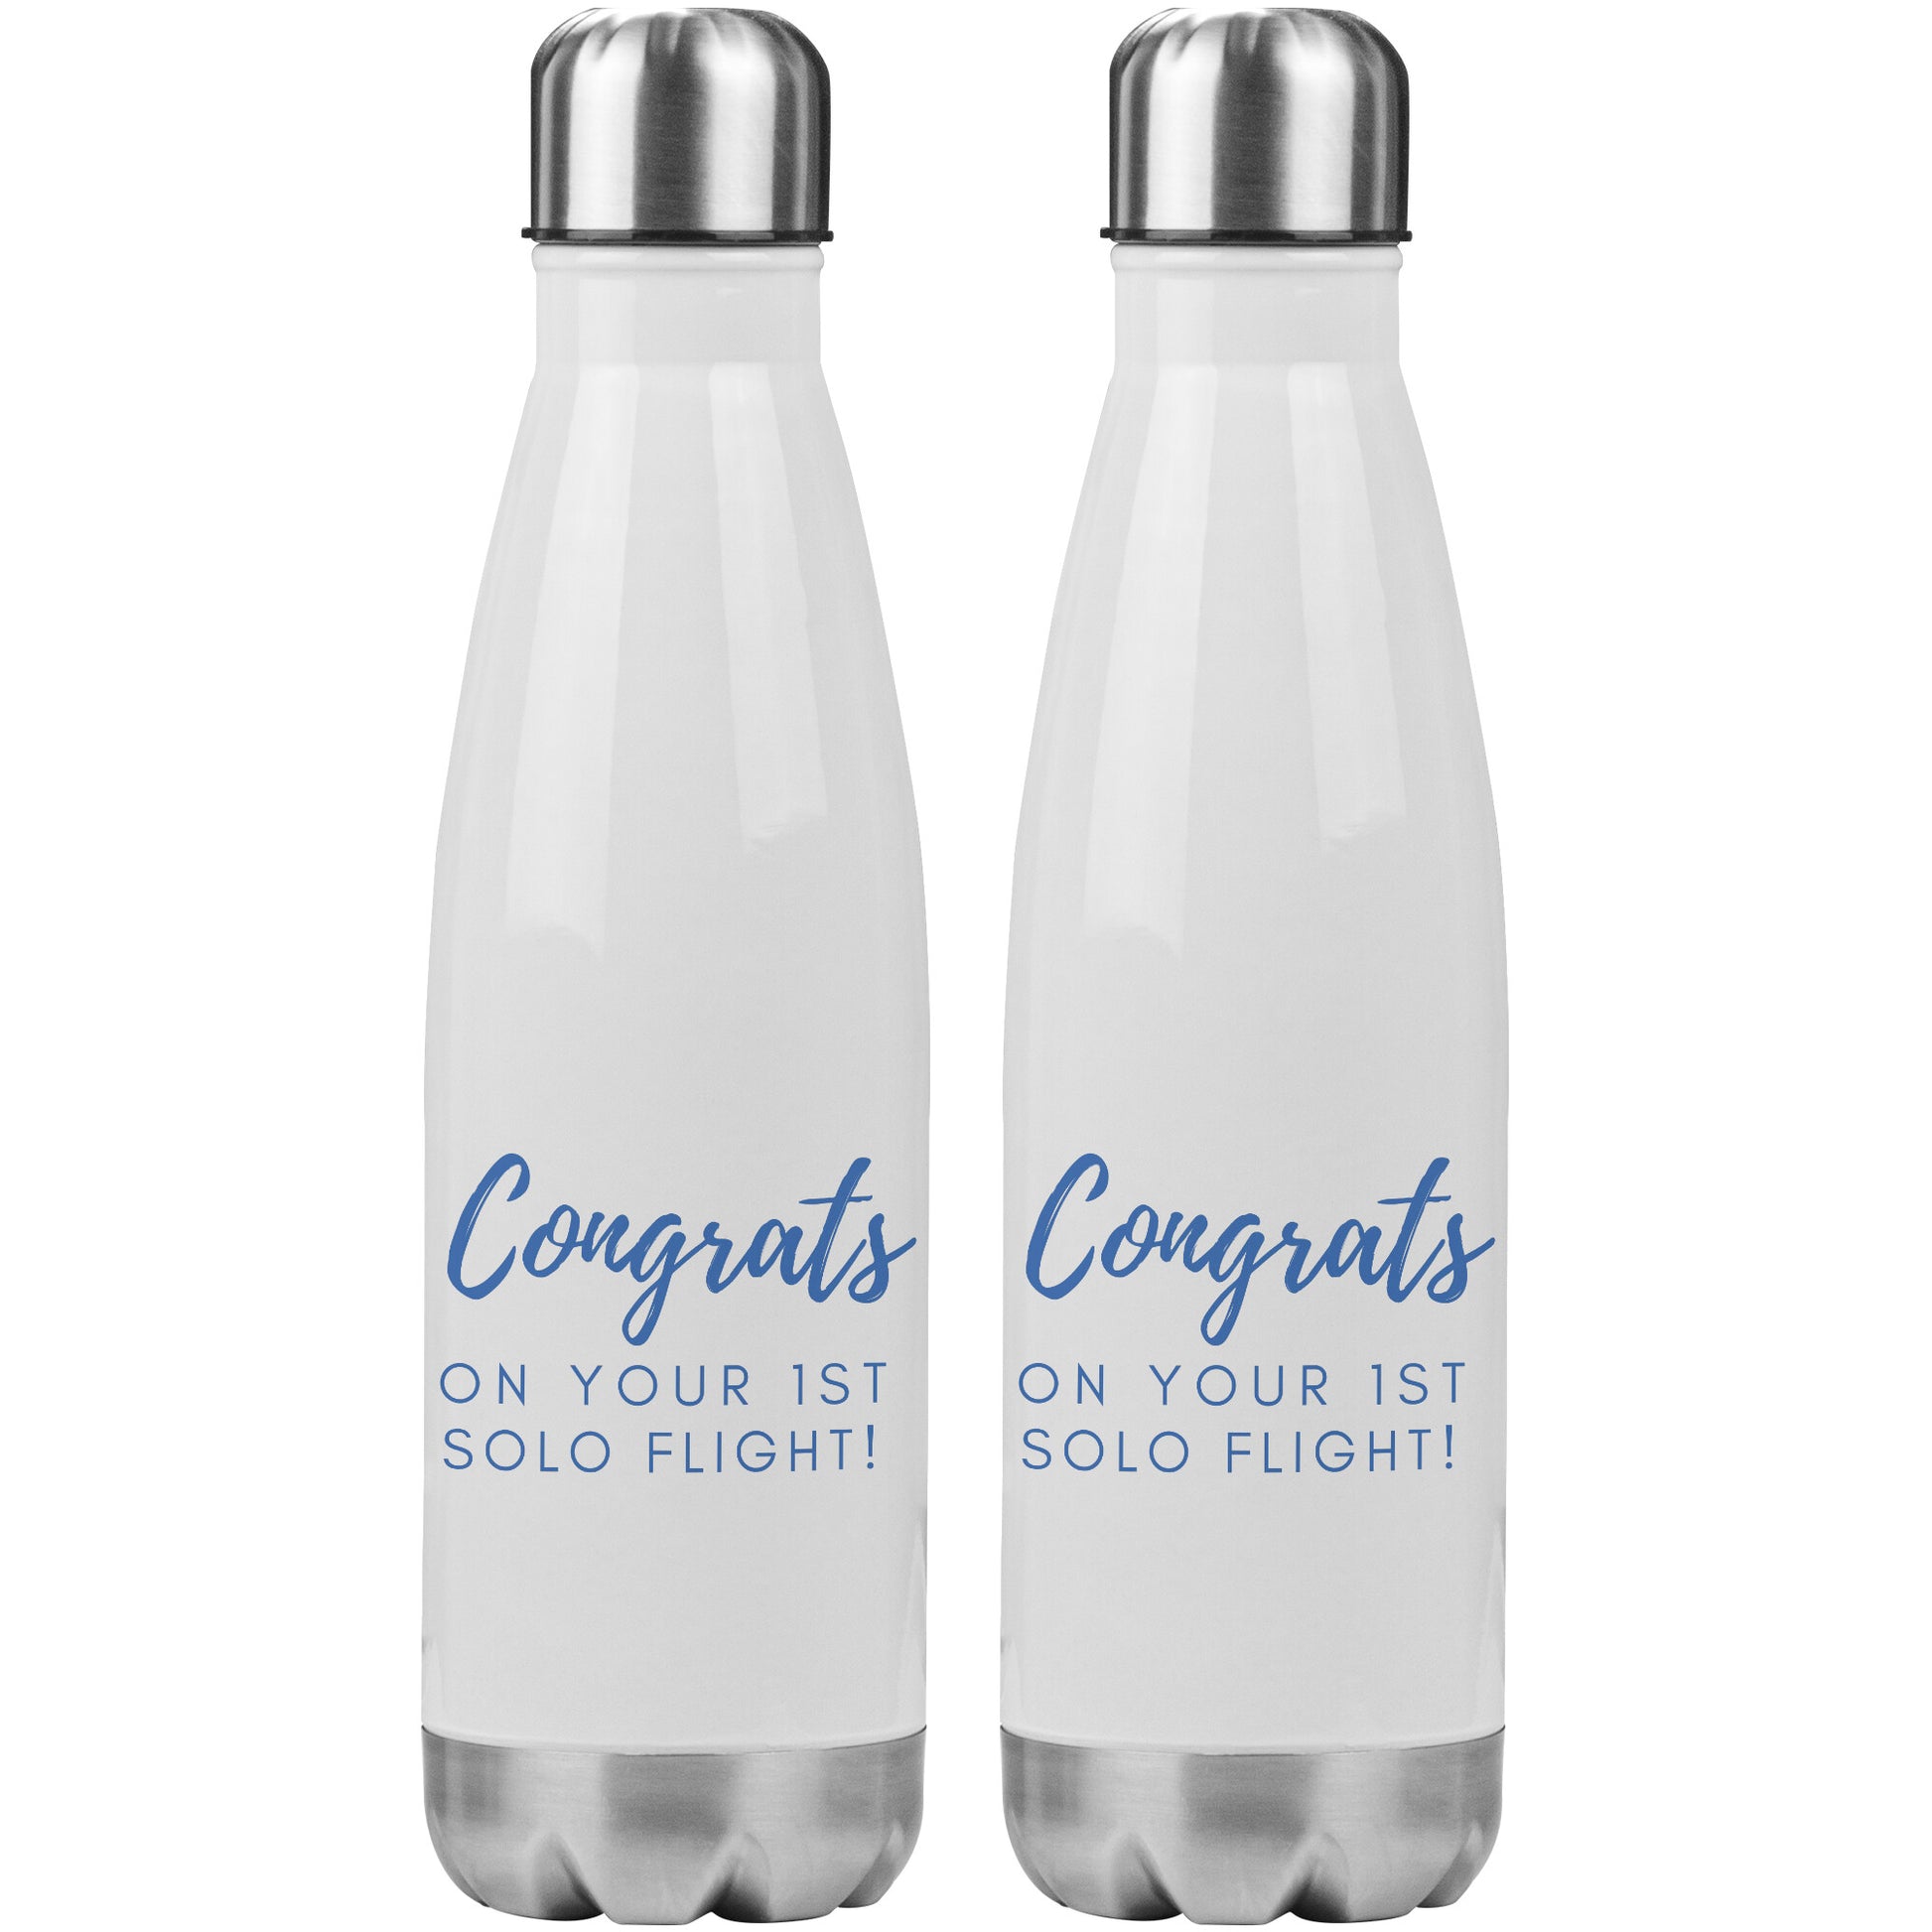 Congrats on your first solo flight! - 20oz stainless steel water bottle with blue text